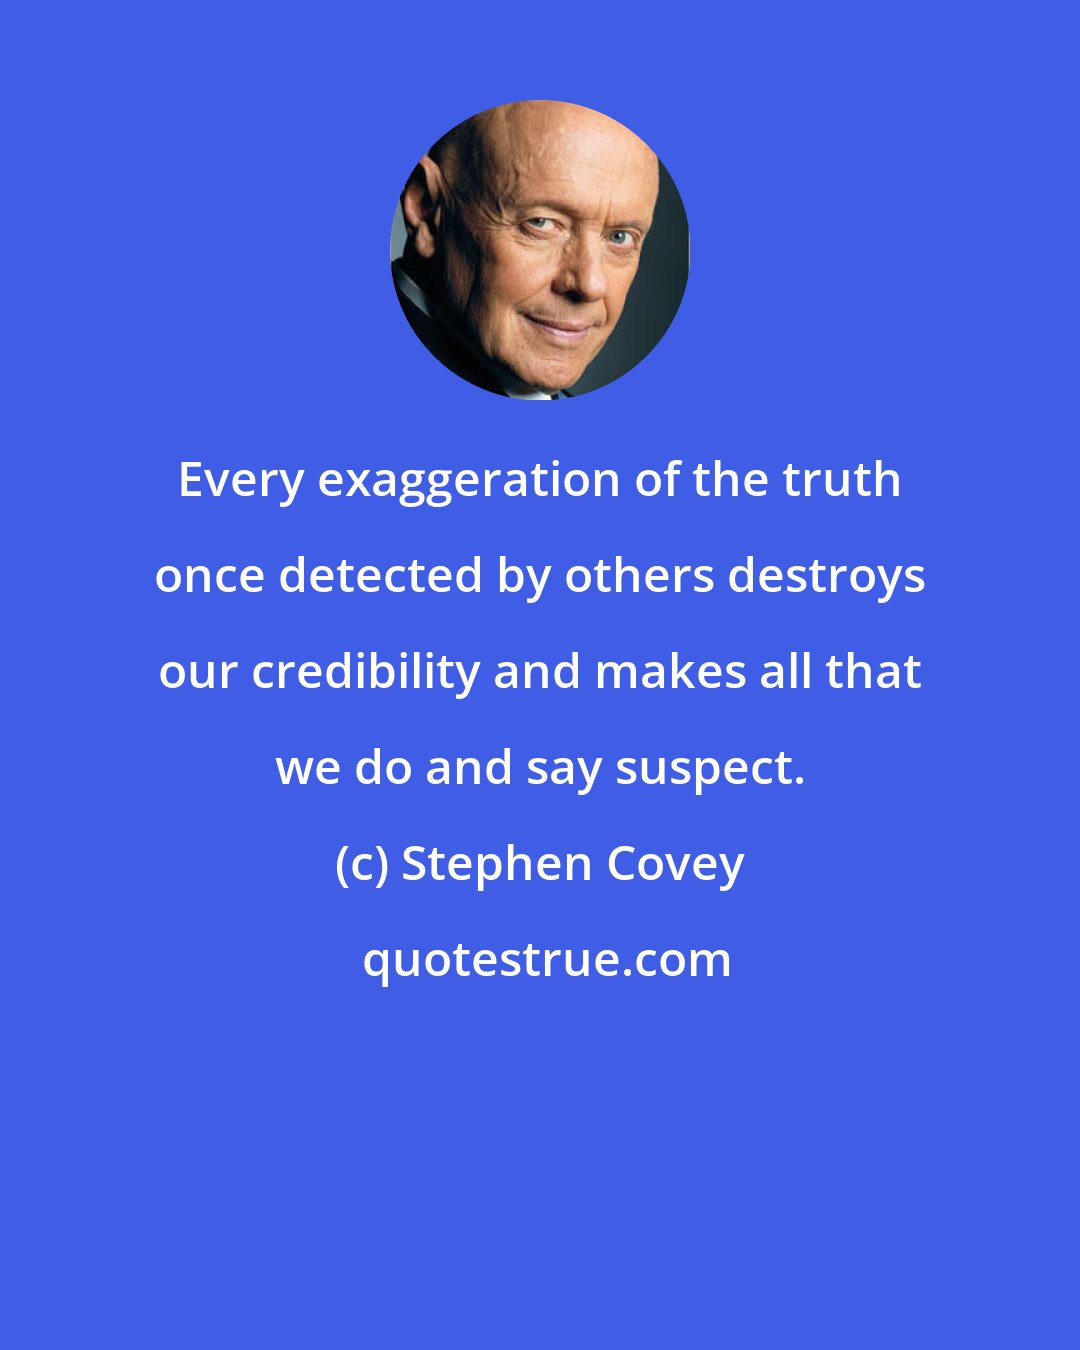 Stephen Covey: Every exaggeration of the truth once detected by others destroys our credibility and makes all that we do and say suspect.